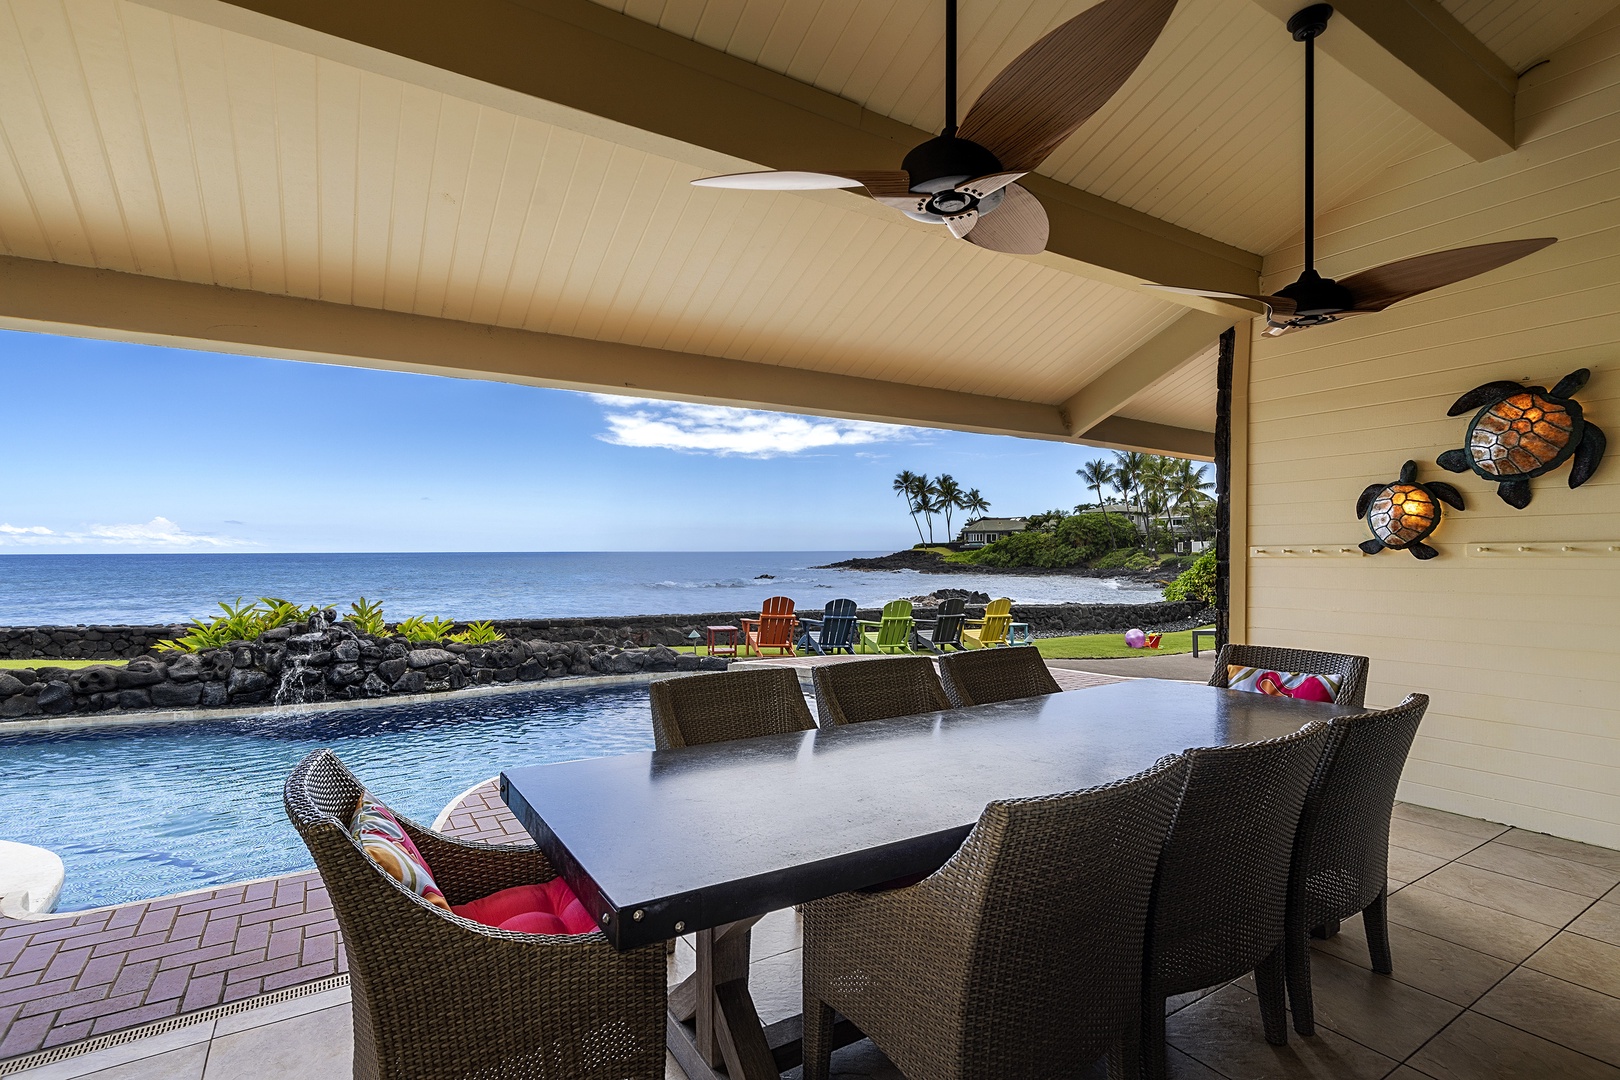 Kailua Kona Vacation Rentals, Hale Pua - Outdoor dining for 8 guests pool side!